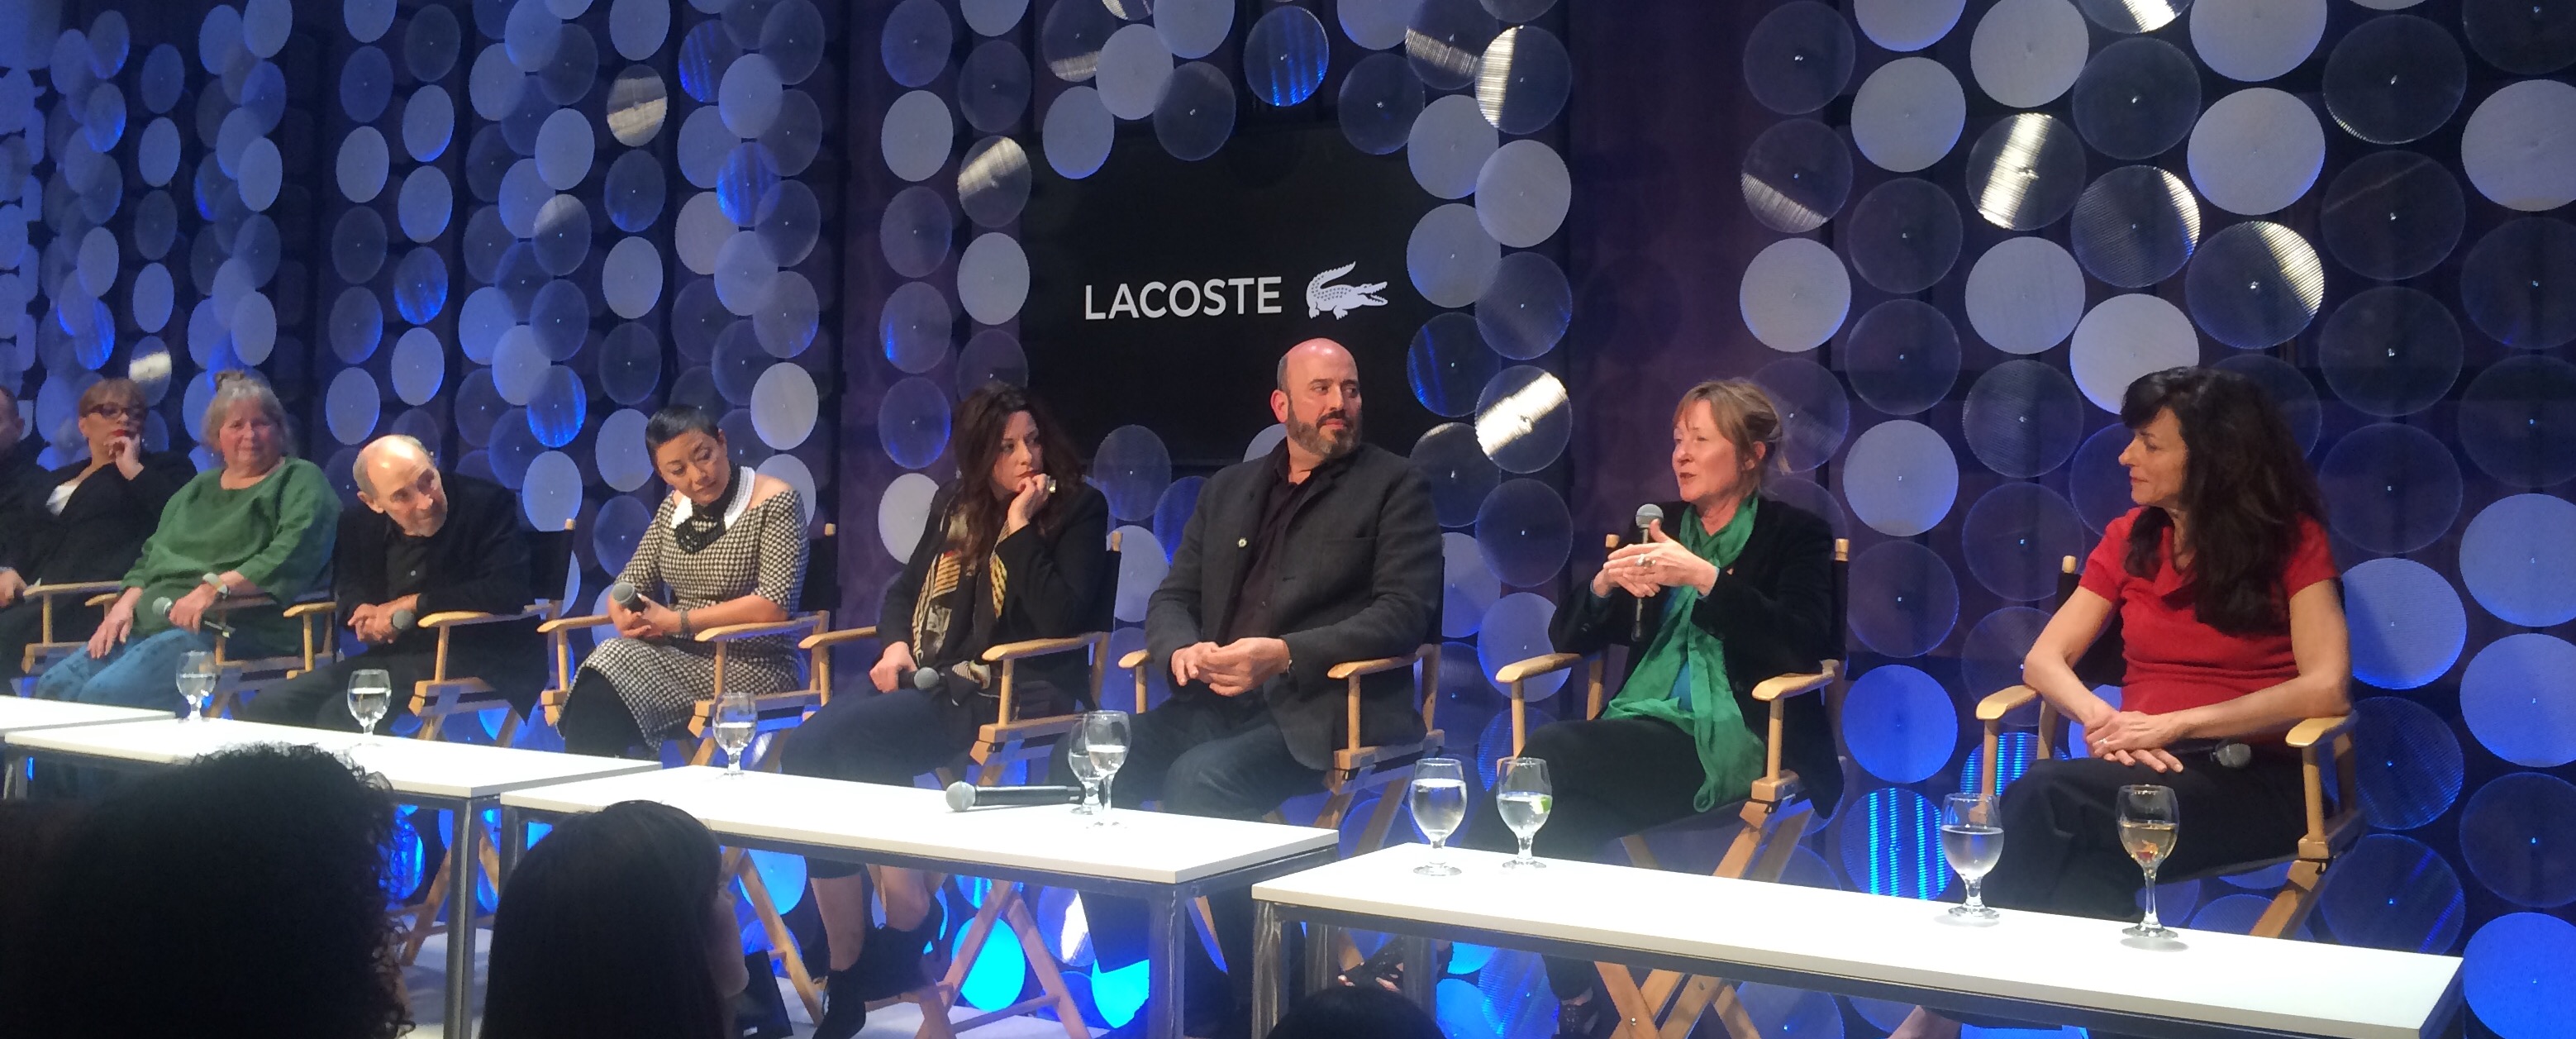 Kari Perkins speaking at the Lacoste panel for the CDG 2015